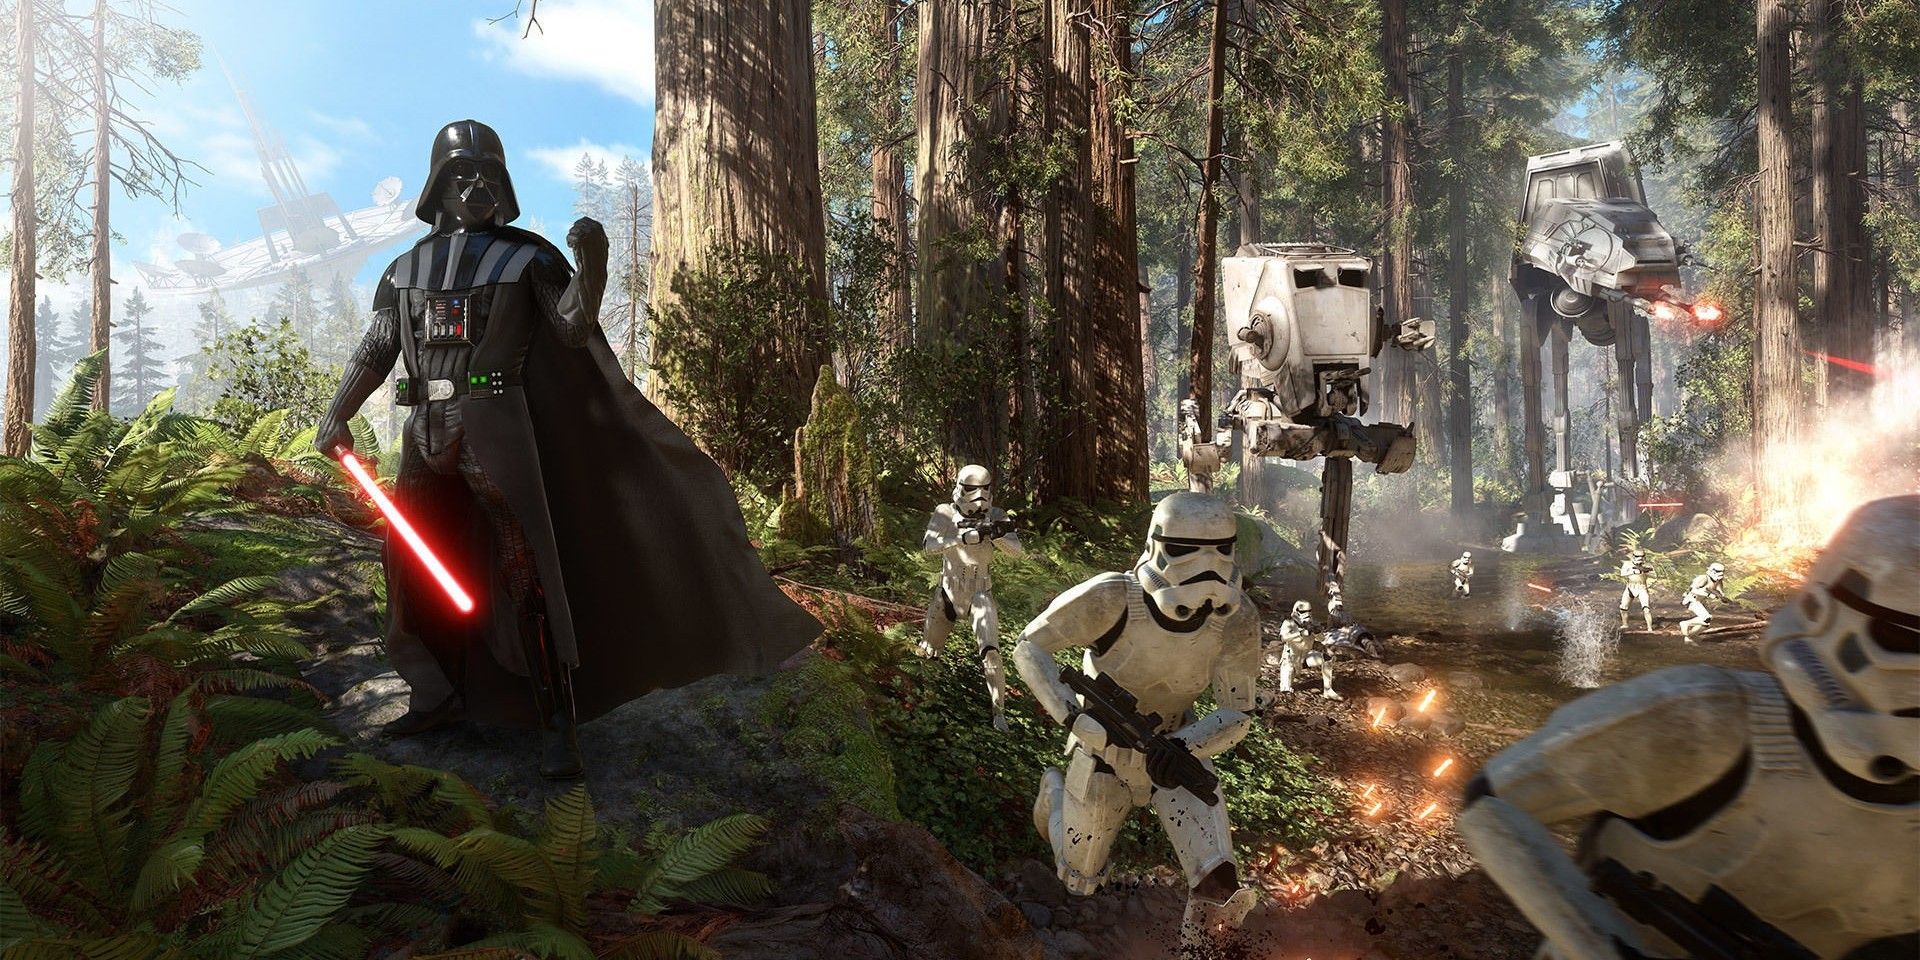 Darth Vader and Stormtroopers make their way through Endor